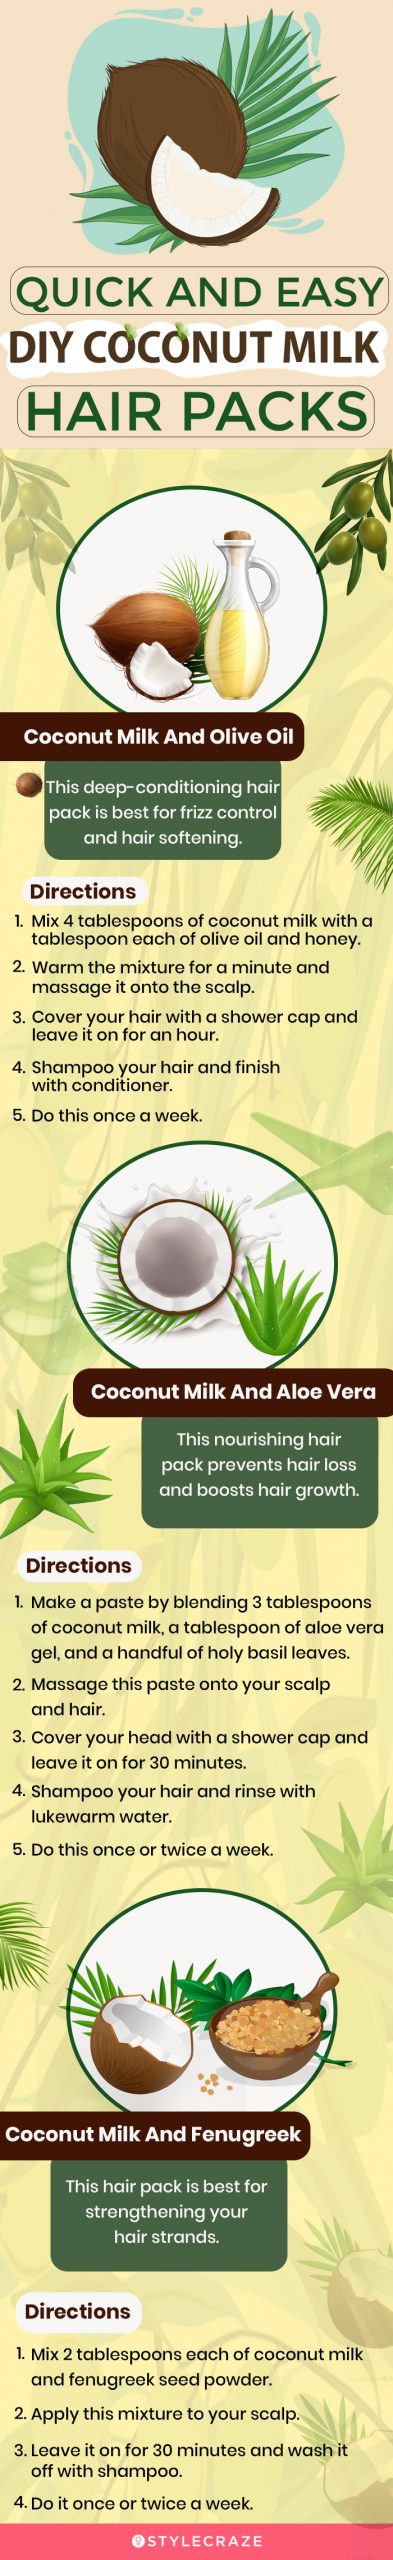 quick and easy diy coconut milk hair packs (infographic)